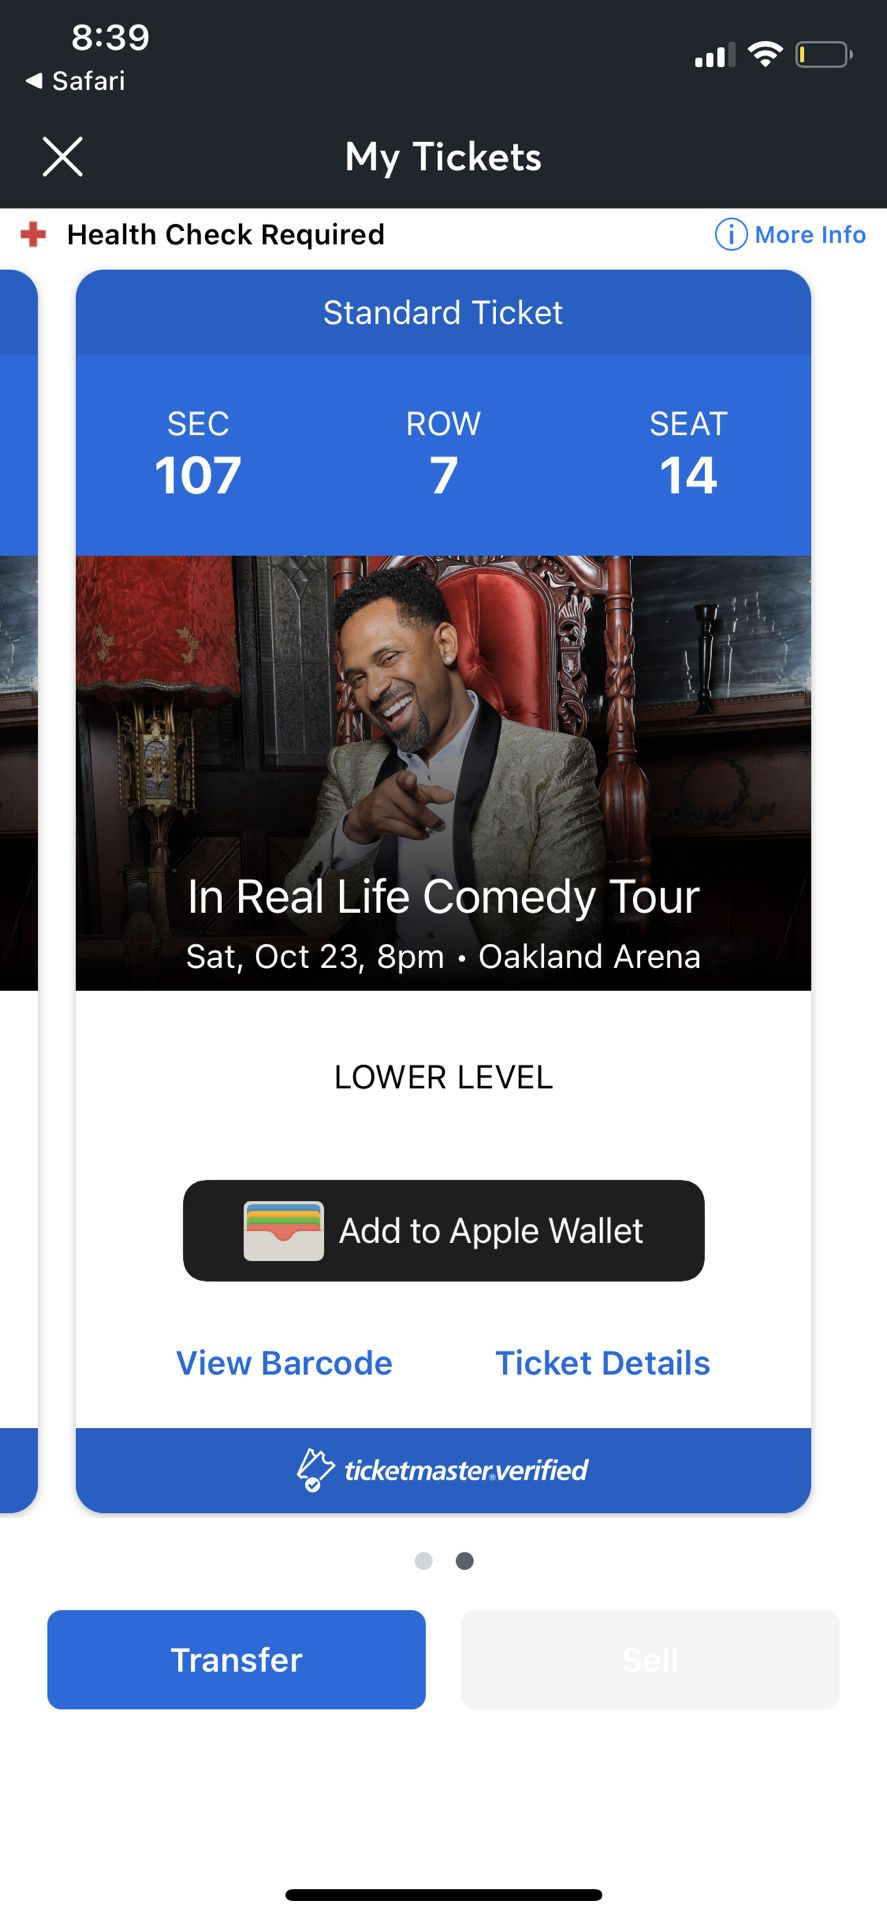 Mike Epps Tickets Good Seats Spent 240$For Sale 2 For 150$ Great Seats Lower Level 